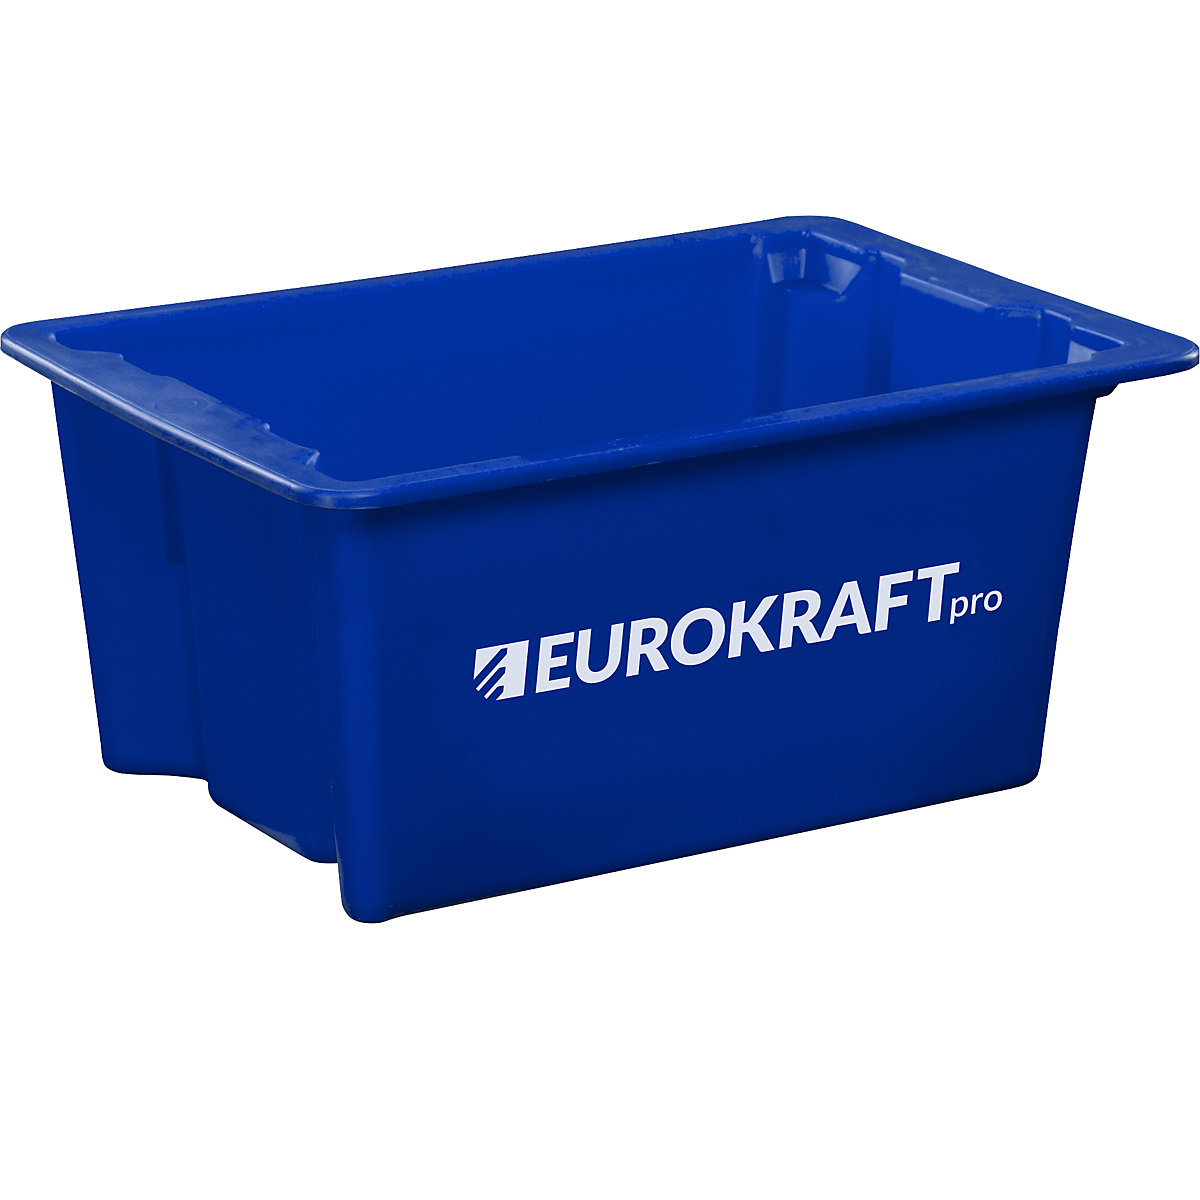 Stack/nest container made of polypropylene suitable for foodstuffs – eurokraft pro, 6 l capacity, pack of 4, solid walls and base, blue